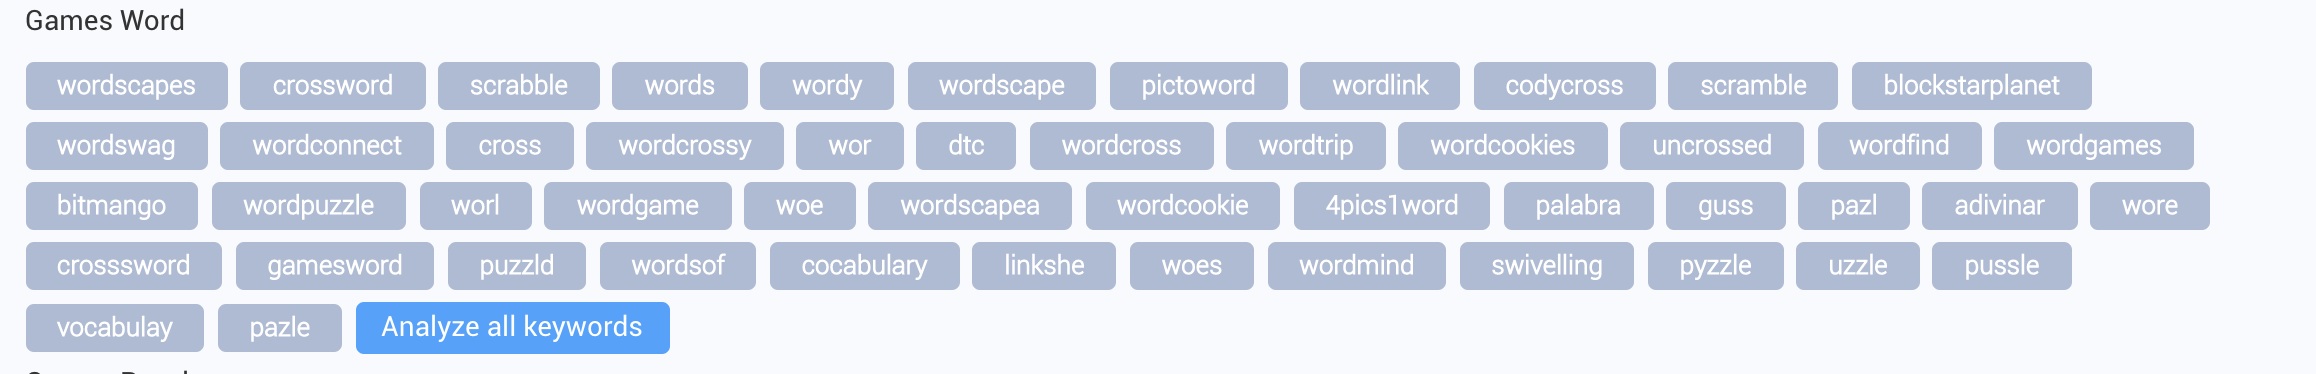 Top category keywords for the Games - Word category (iOS US)